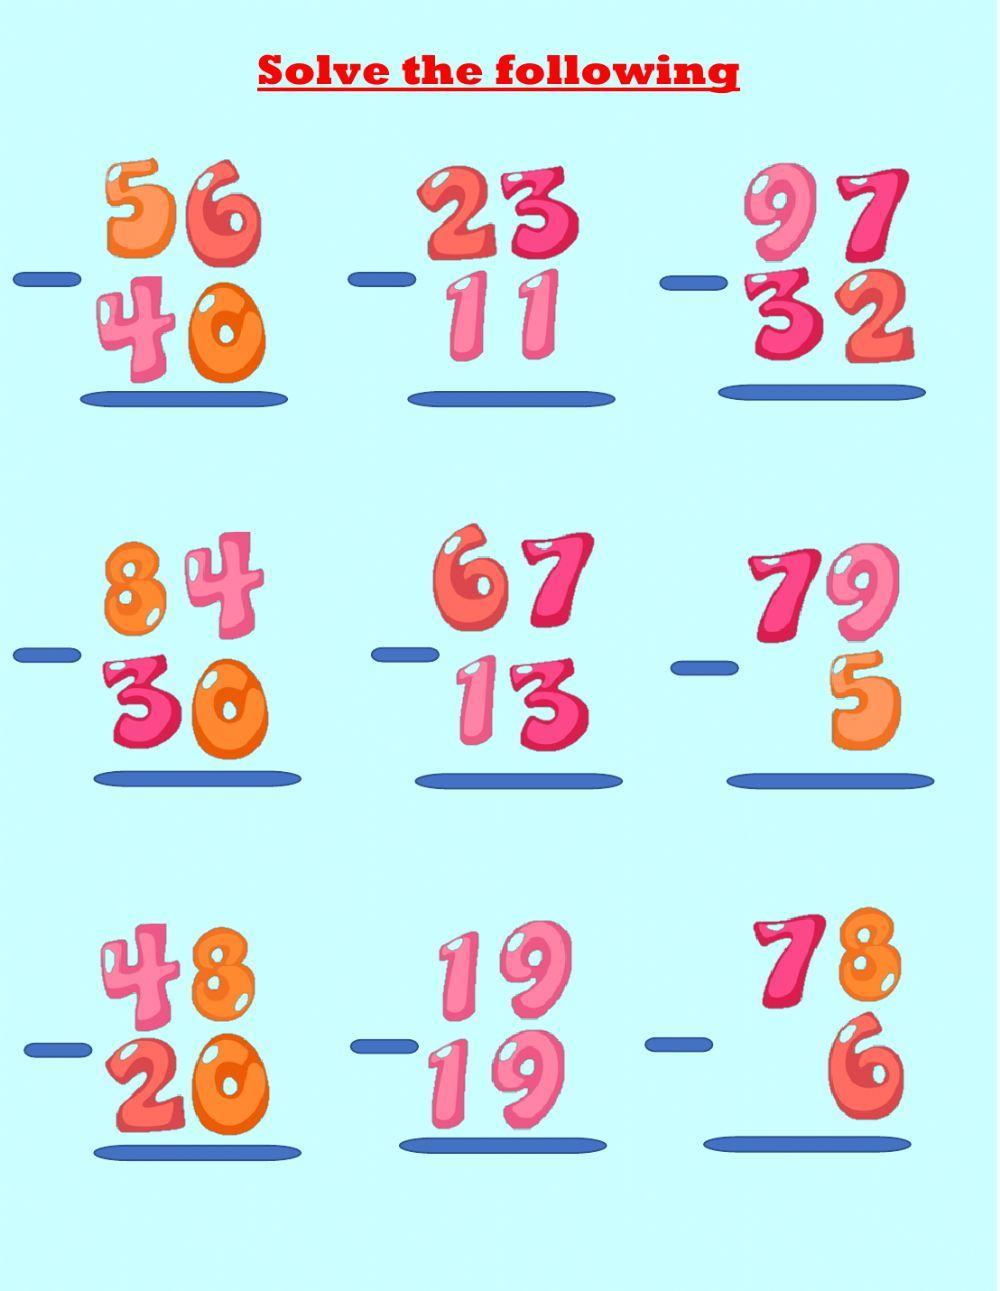 Subtraction without regrouping